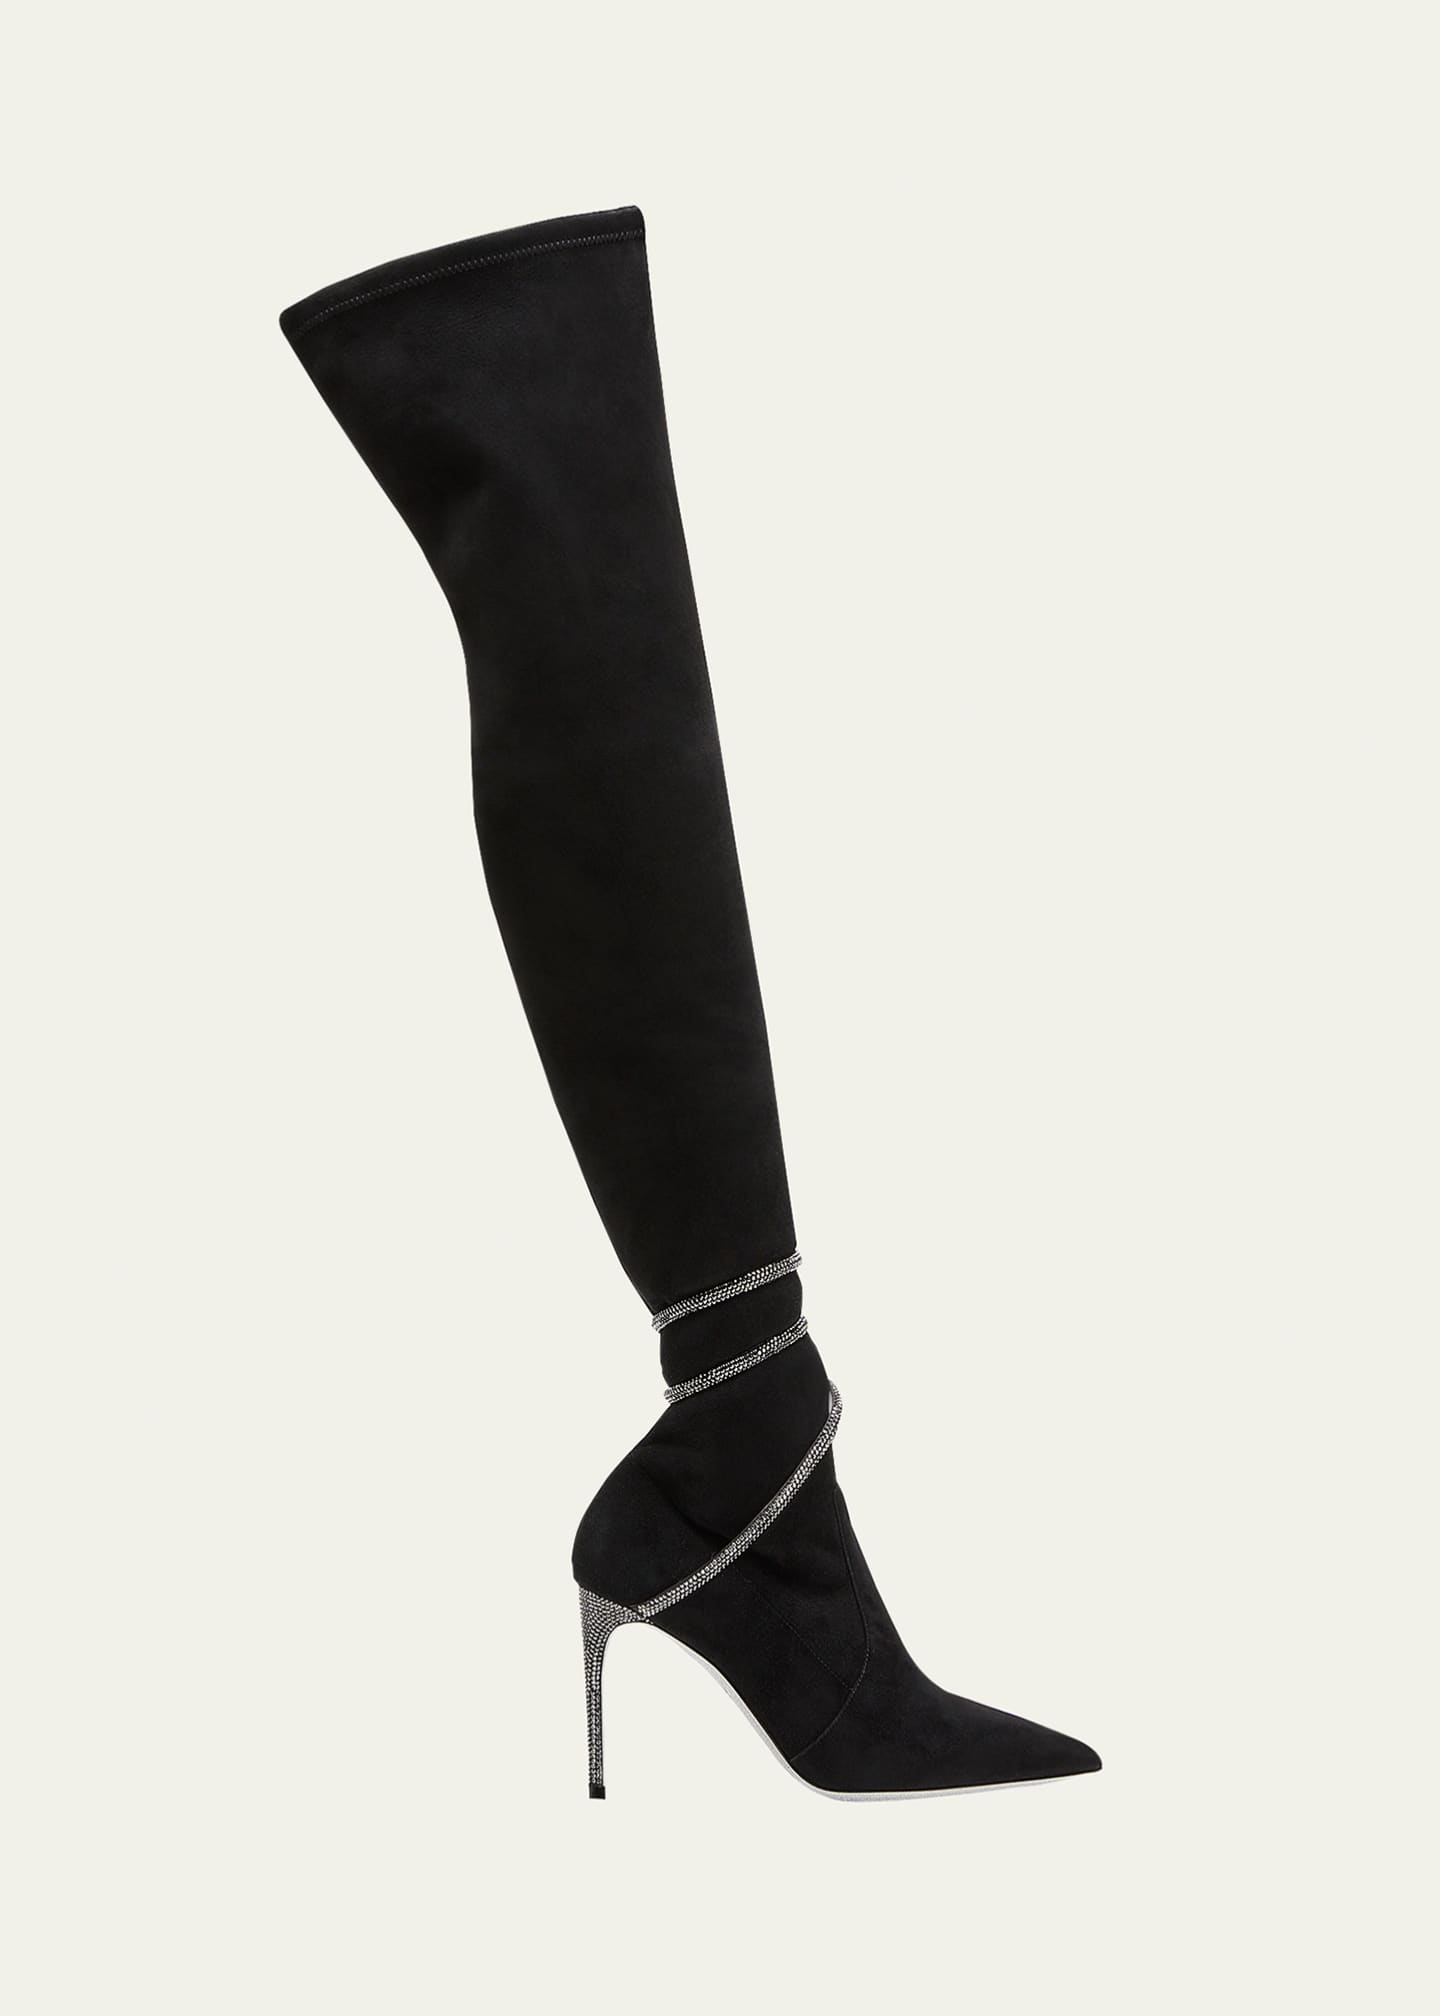 Rene Caovilla Suede Snake Over-The-Knee Boots - Bergdorf Goodman